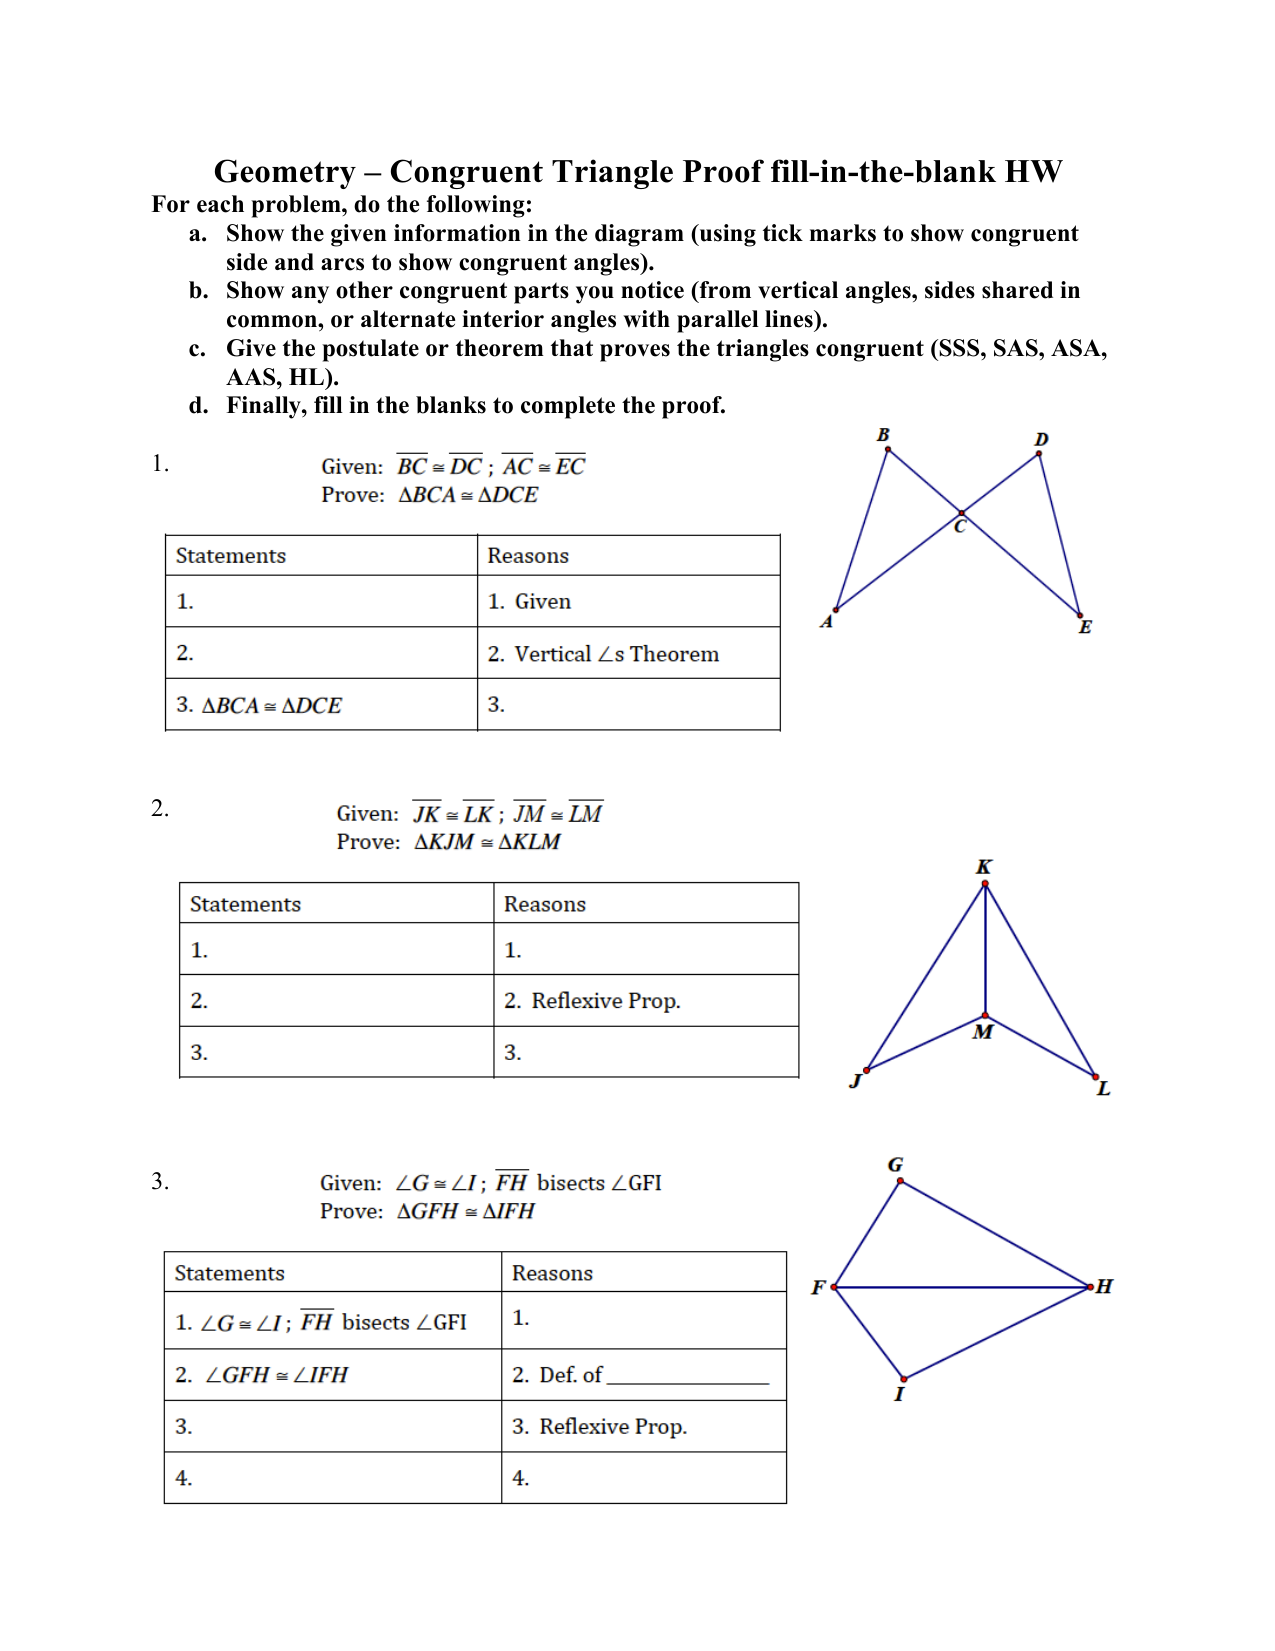 Geometry – Congruent Triangle Proof fill-in-the-blank Inside Triangle Congruence Proof Worksheet